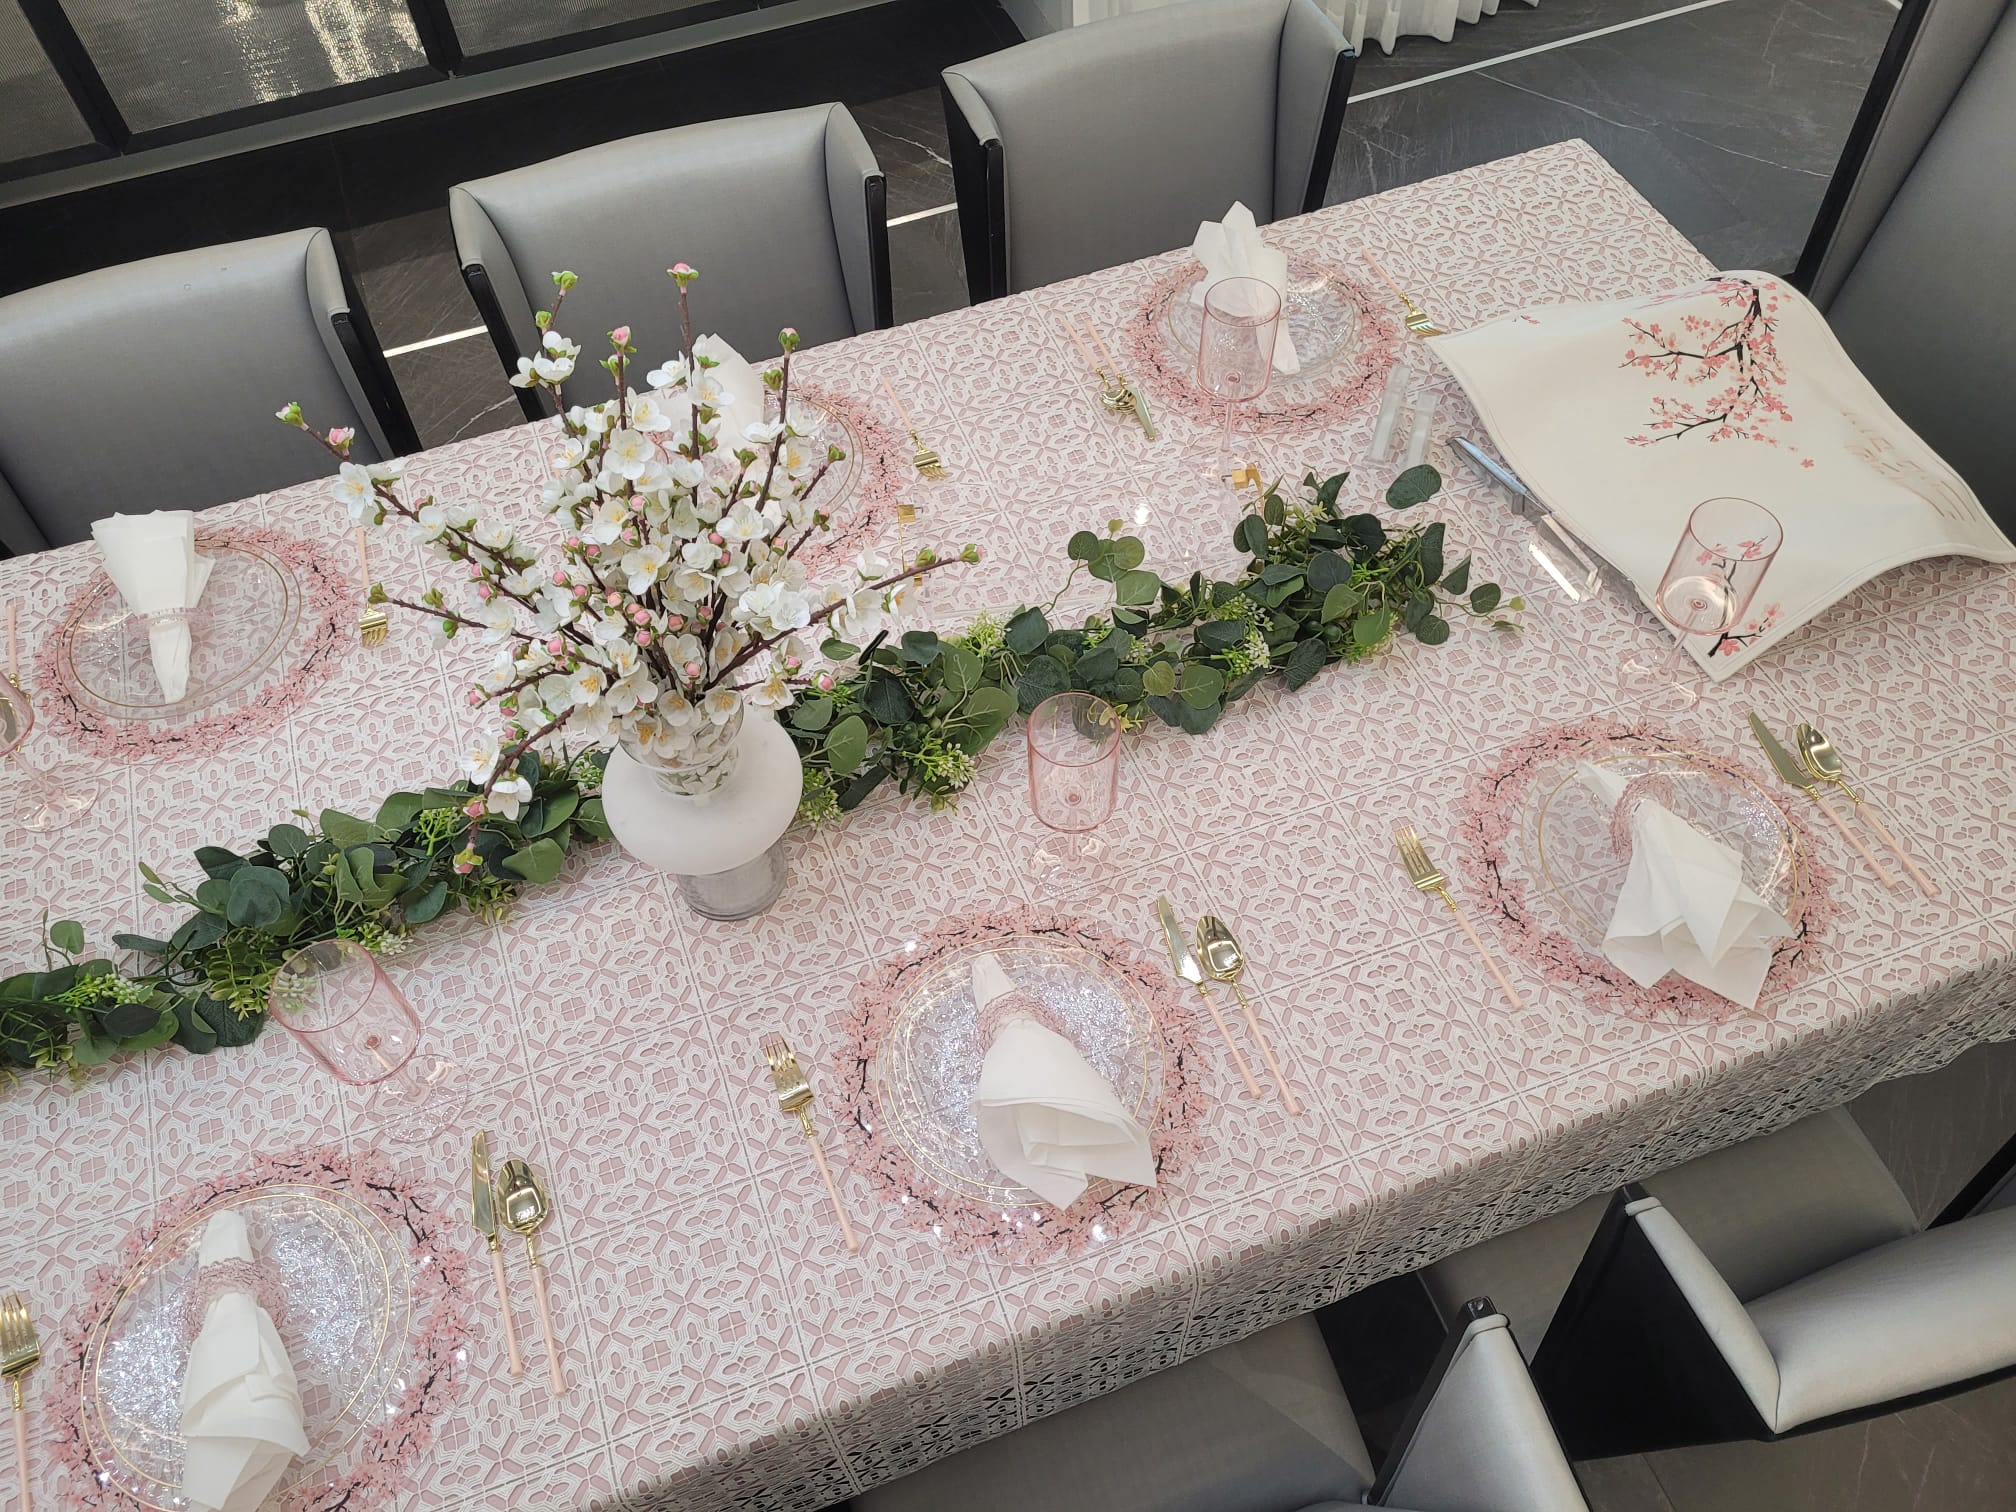 Hacks to make your tablescape beautiful but functional